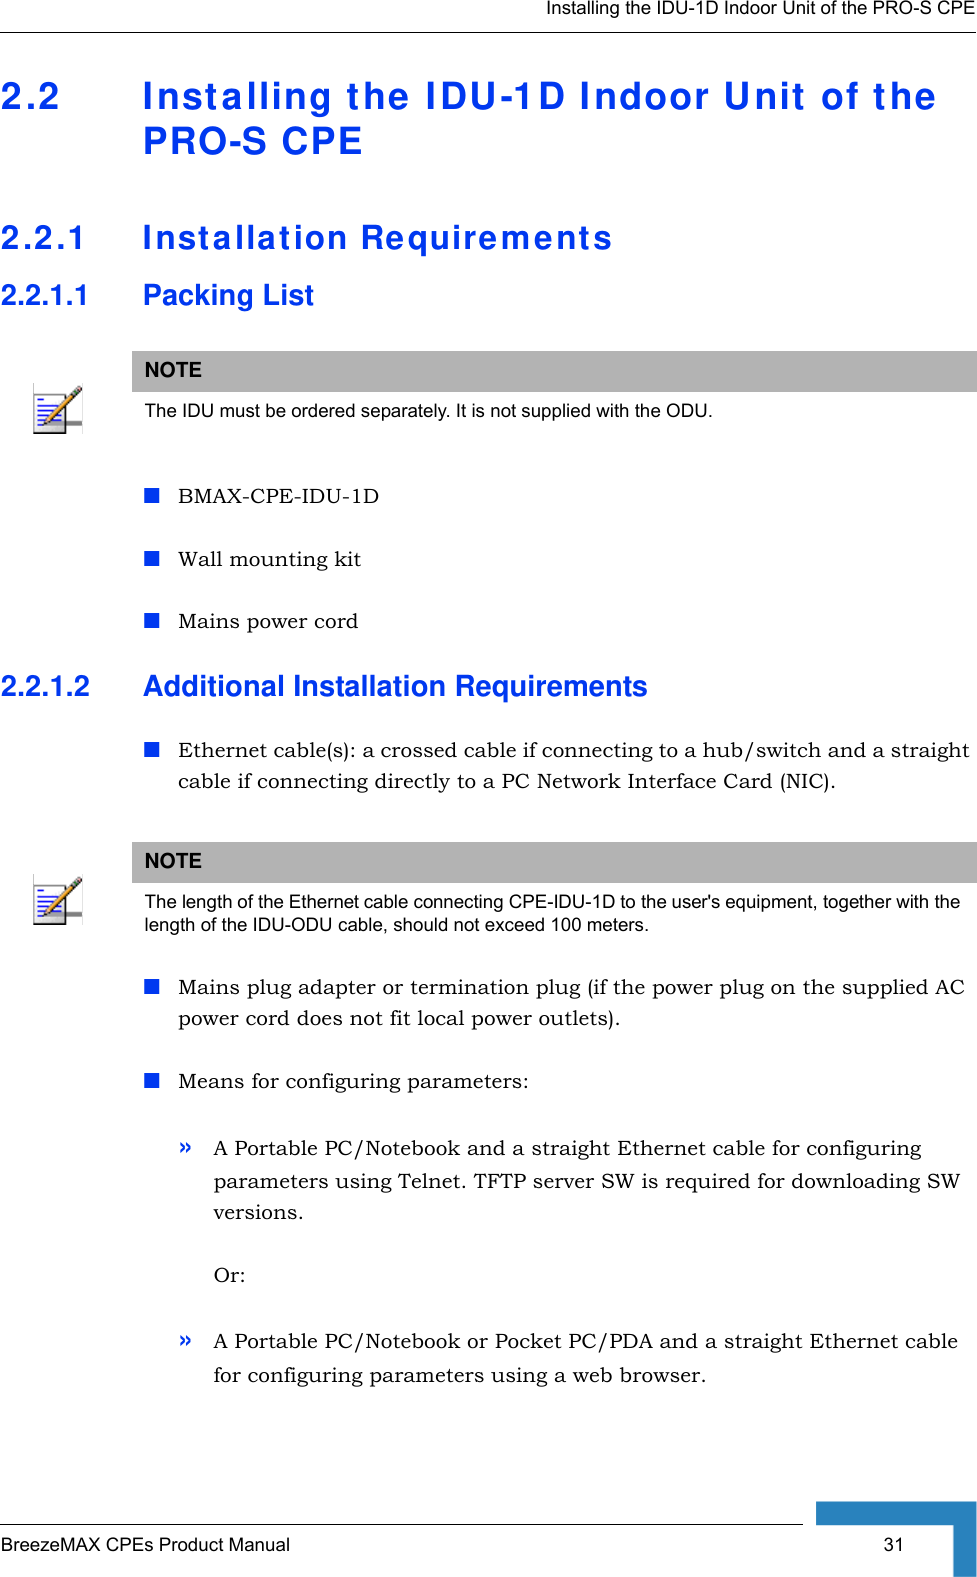 Installing the IDU-1D Indoor Unit of the PRO-S CPEBreezeMAX CPEs Product Manual  312.2 Installing the IDU-1D Indoor Unit of the PRO-S CPE2.2.1 Installation Requirements2.2.1.1 Packing ListBMAX-CPE-IDU-1D Wall mounting kit Mains power cord2.2.1.2 Additional Installation RequirementsEthernet cable(s): a crossed cable if connecting to a hub/switch and a straight cable if connecting directly to a PC Network Interface Card (NIC).Mains plug adapter or termination plug (if the power plug on the supplied AC power cord does not fit local power outlets).Means for configuring parameters: »A Portable PC/Notebook and a straight Ethernet cable for configuring parameters using Telnet. TFTP server SW is required for downloading SW versions.Or:»A Portable PC/Notebook or Pocket PC/PDA and a straight Ethernet cable for configuring parameters using a web browser. NOTEThe IDU must be ordered separately. It is not supplied with the ODU.NOTEThe length of the Ethernet cable connecting CPE-IDU-1D to the user&apos;s equipment, together with the length of the IDU-ODU cable, should not exceed 100 meters.